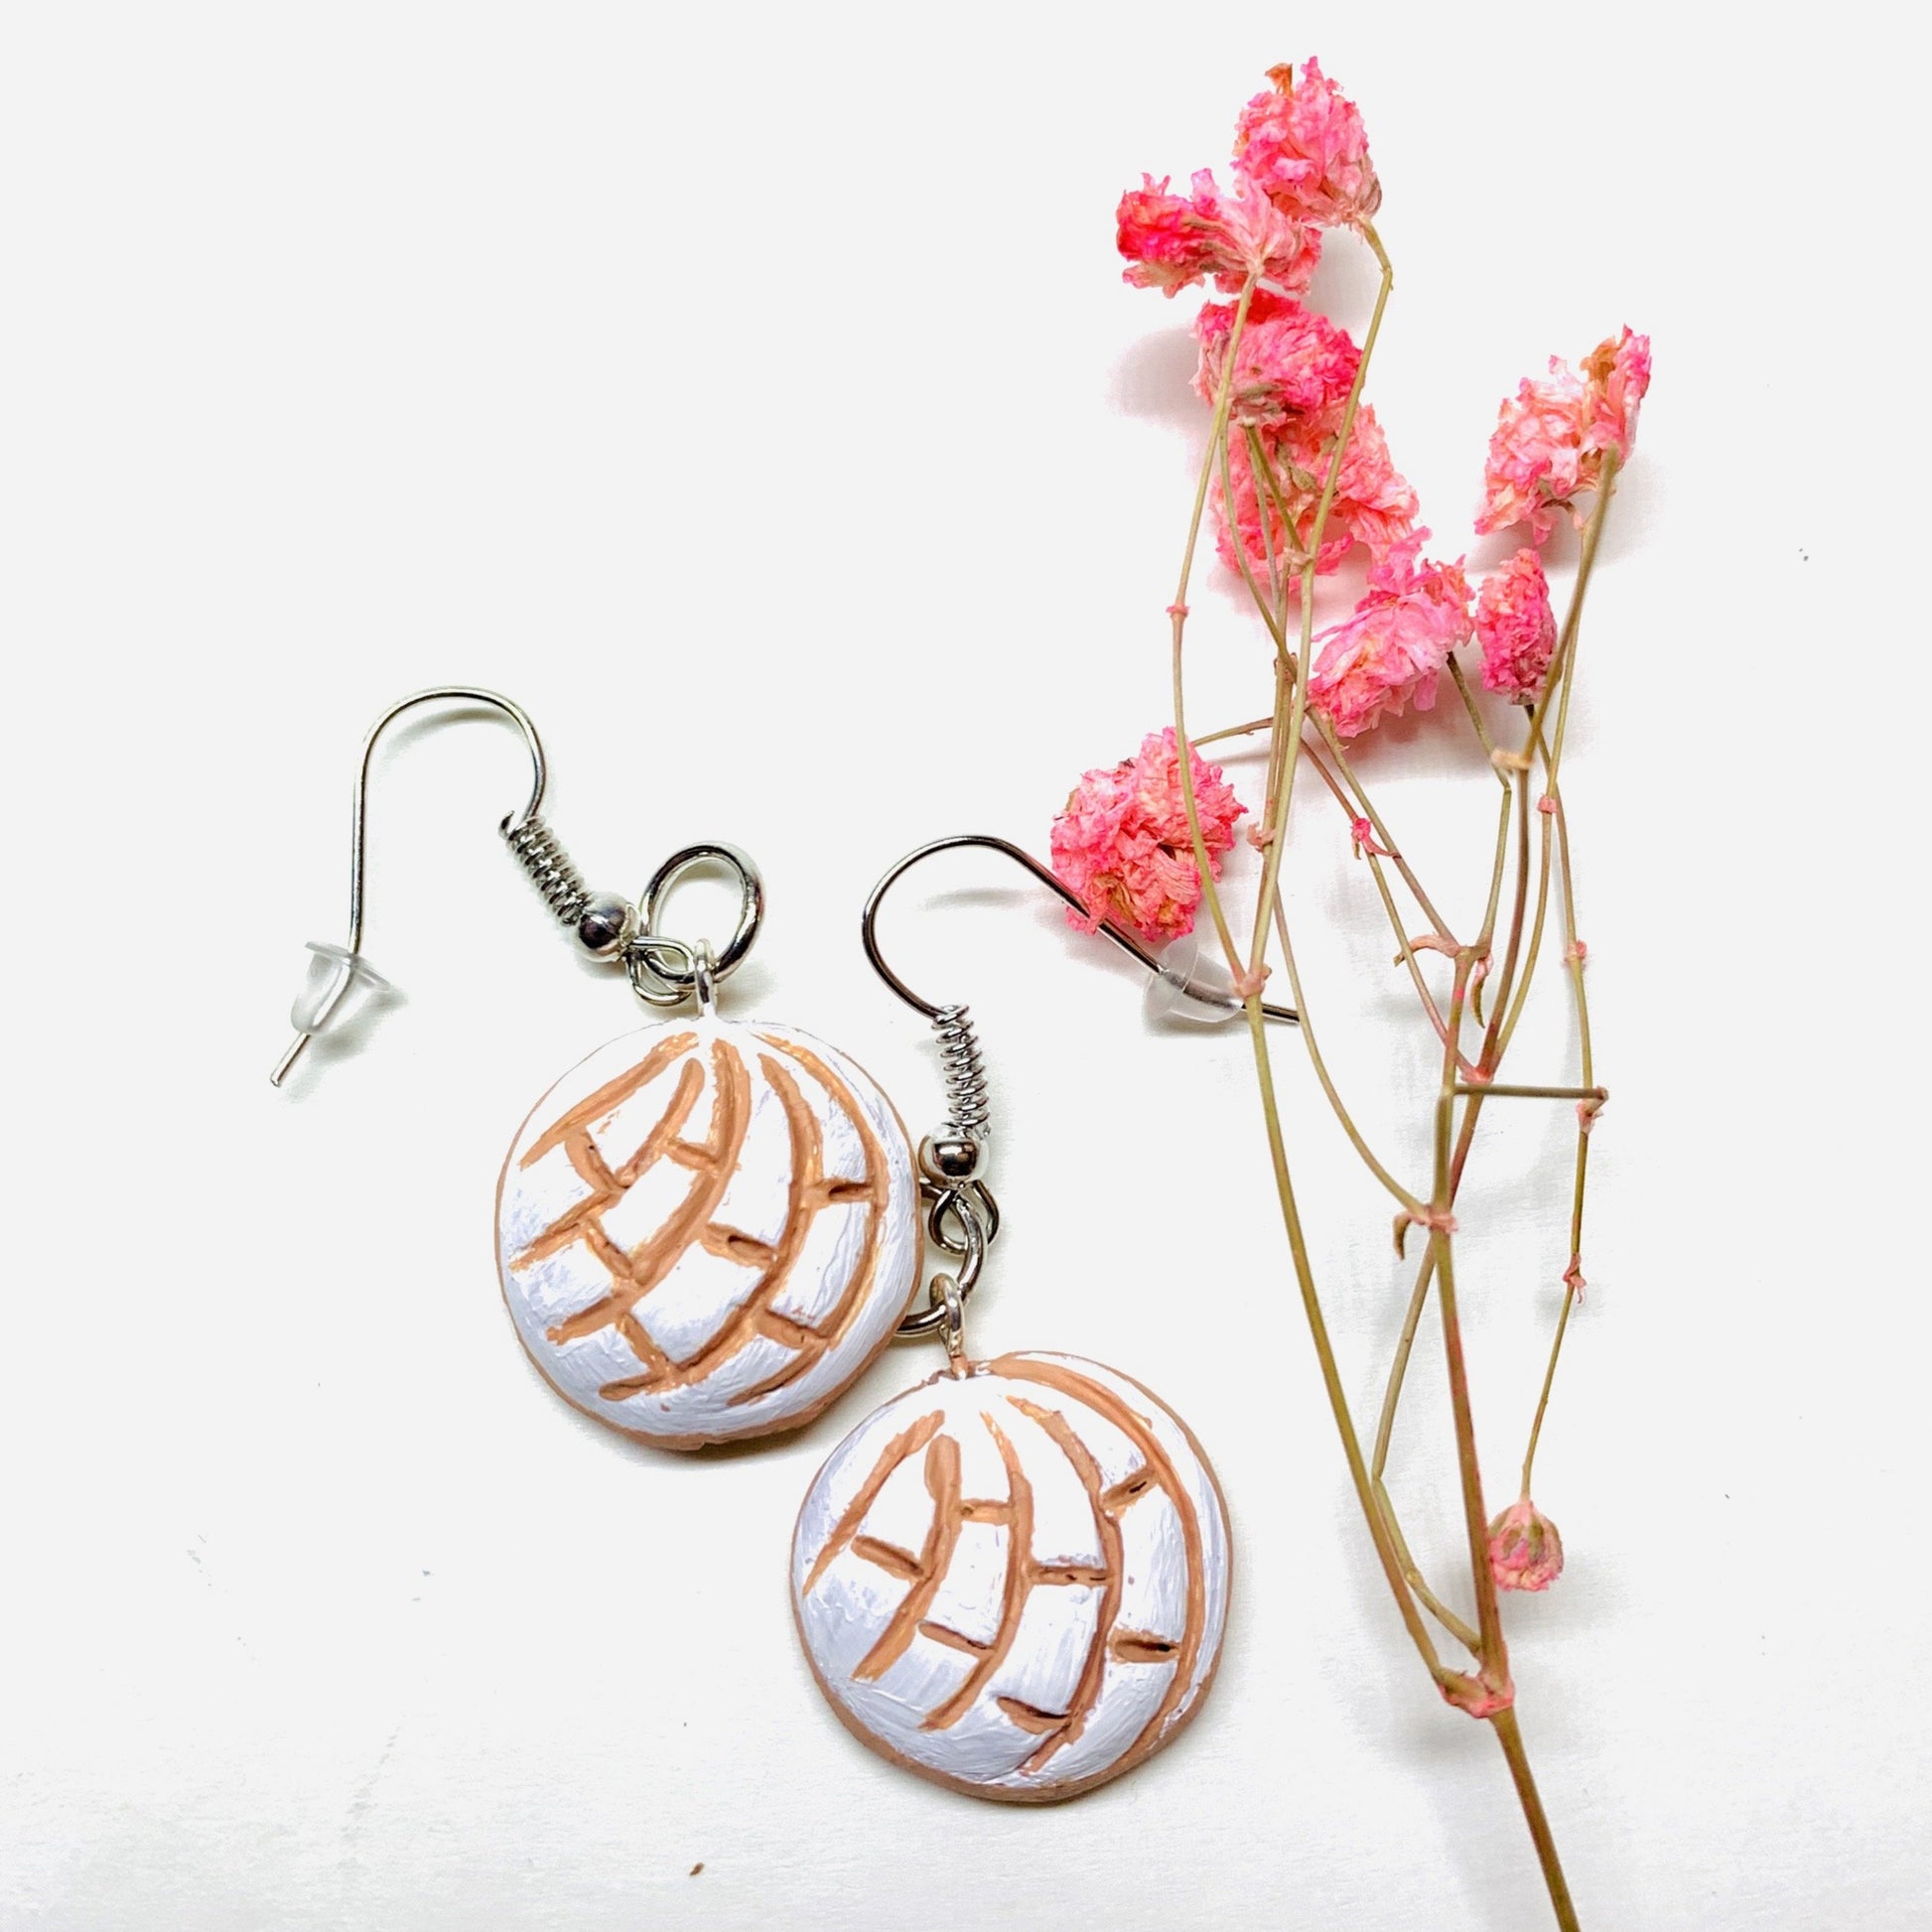 Concha Clay Earrings: Handmade hand painted white vanilla cream clay concha (conchitas) earrings. Food jewelry inspired by Frida Kahlo. Mexican jewelry drop and dangle earrings for girls and fridalovers